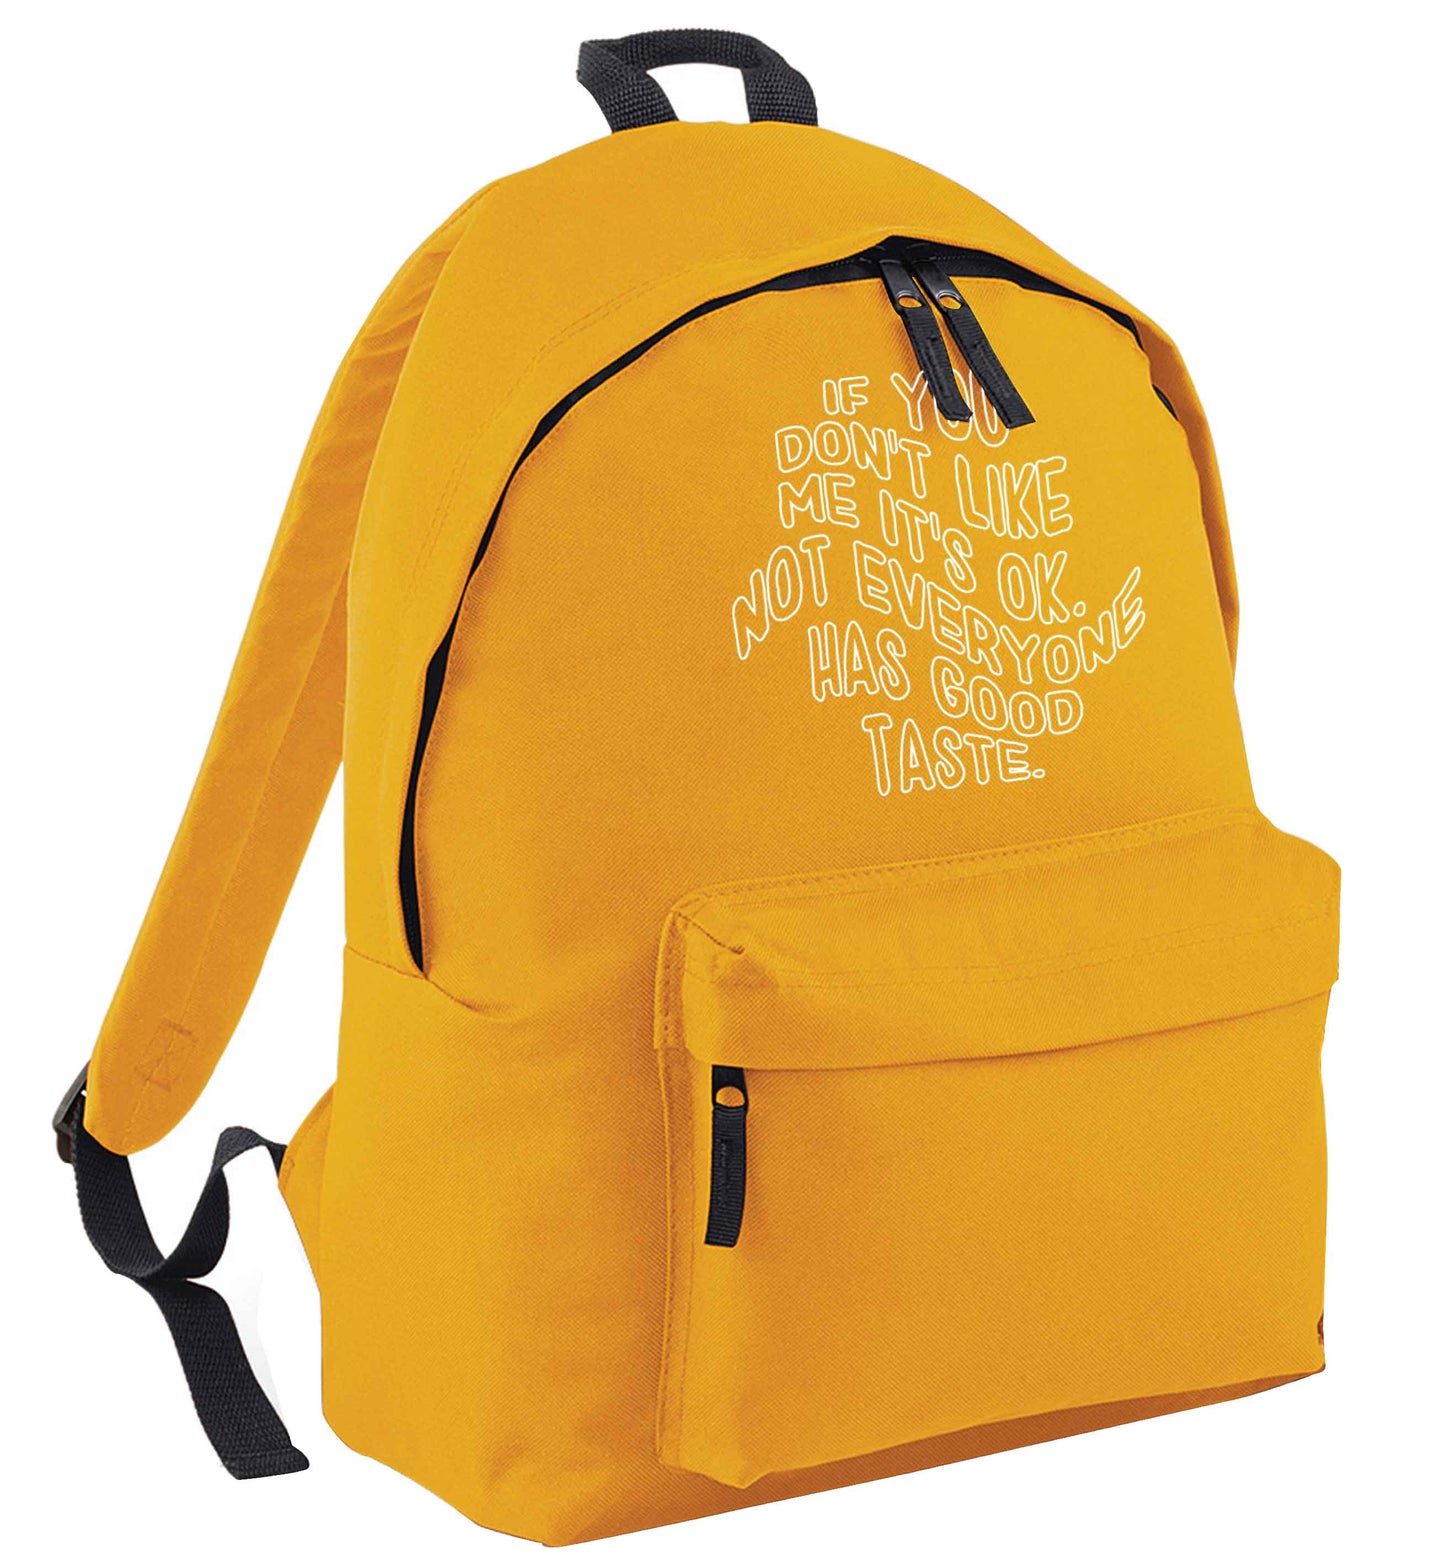 If you don't like me it's ok not everyone has good taste mustard adults backpack